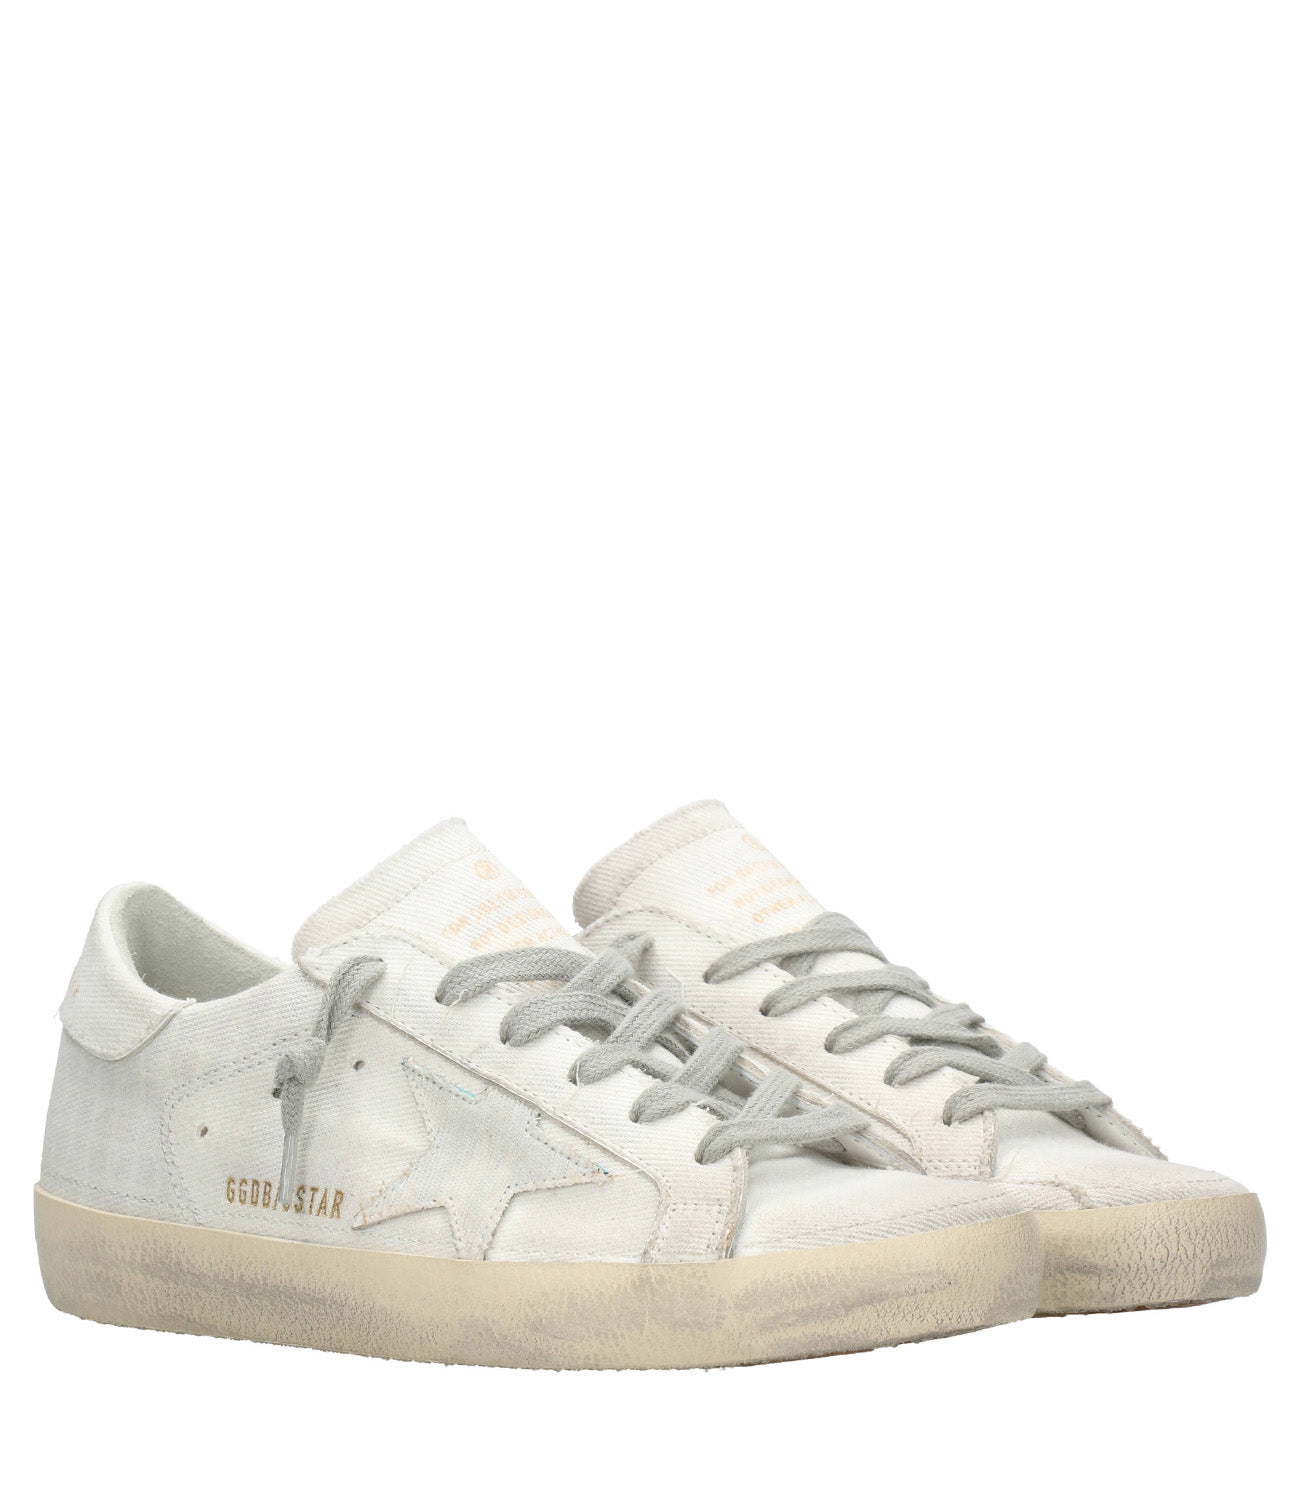 Golden Goose | Superstar Sneakers White and Multicolor